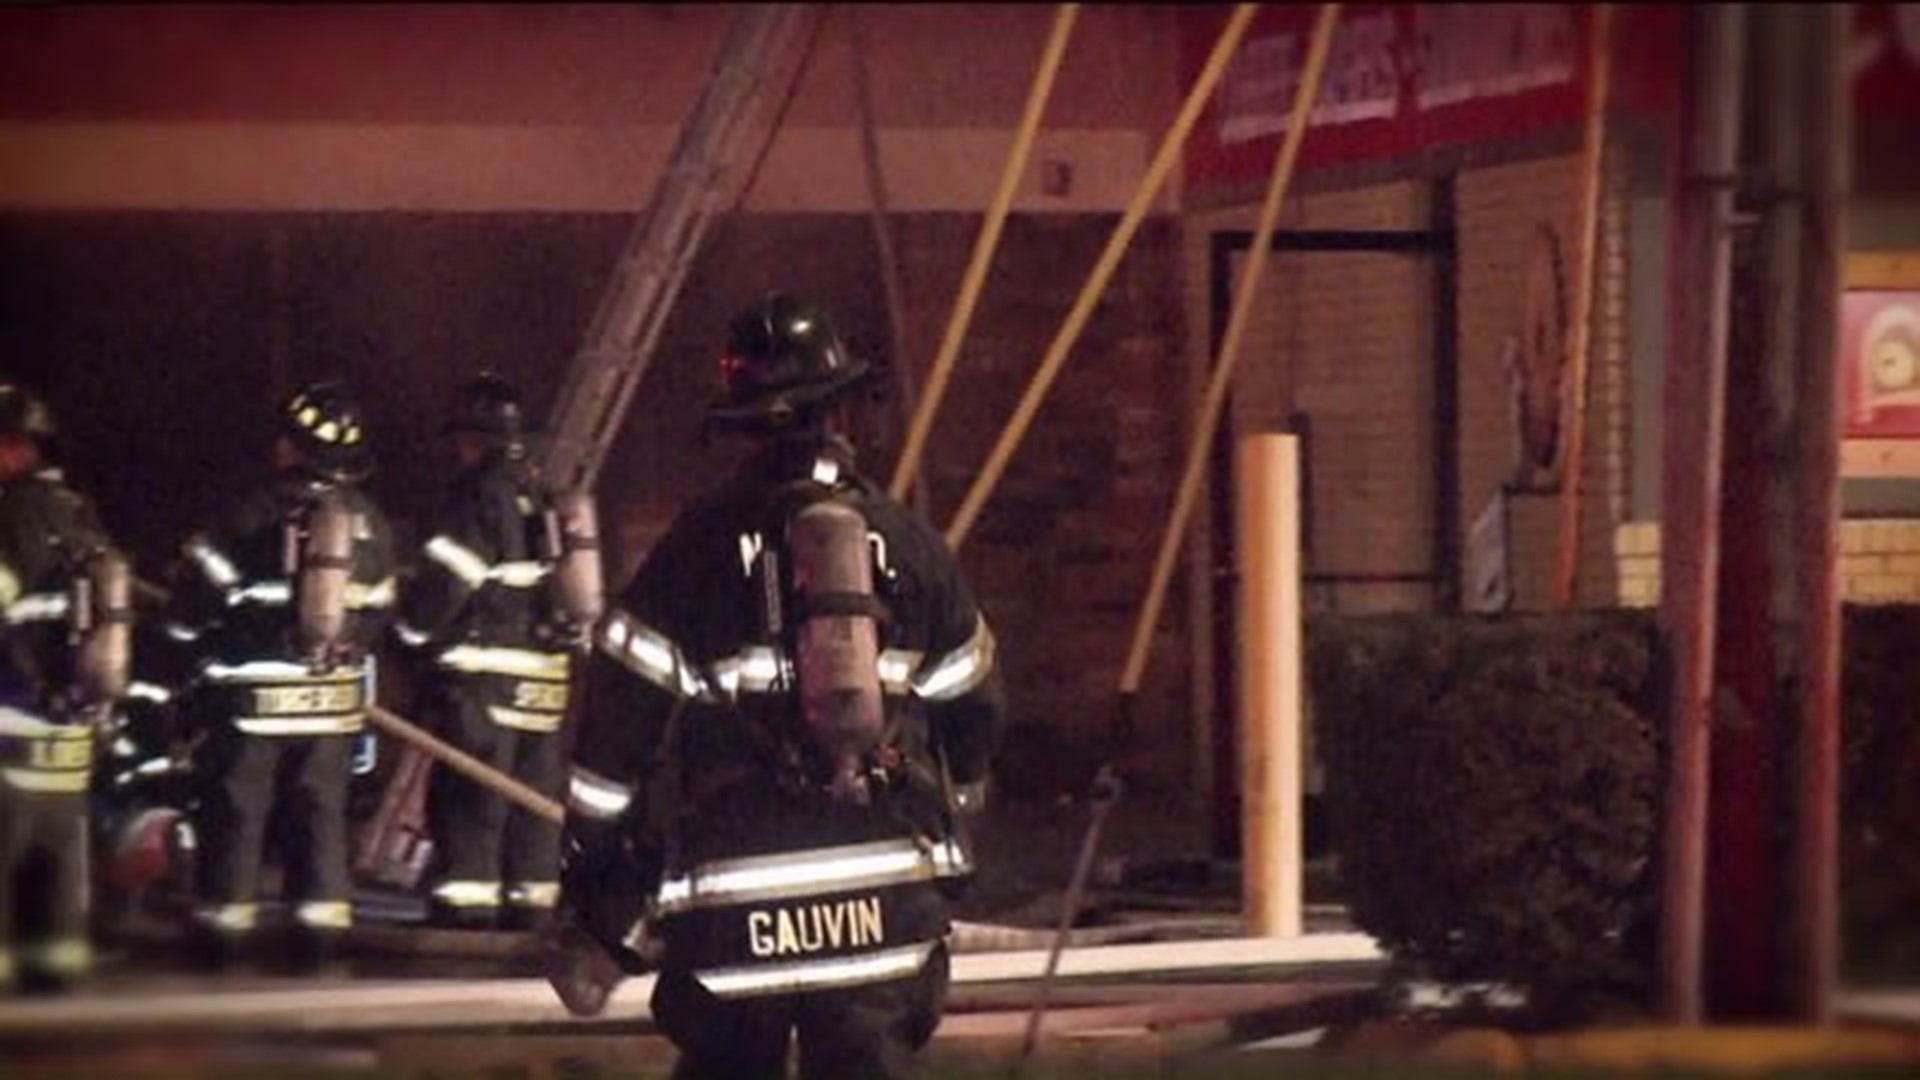 Firefighters fighting for overtime pay